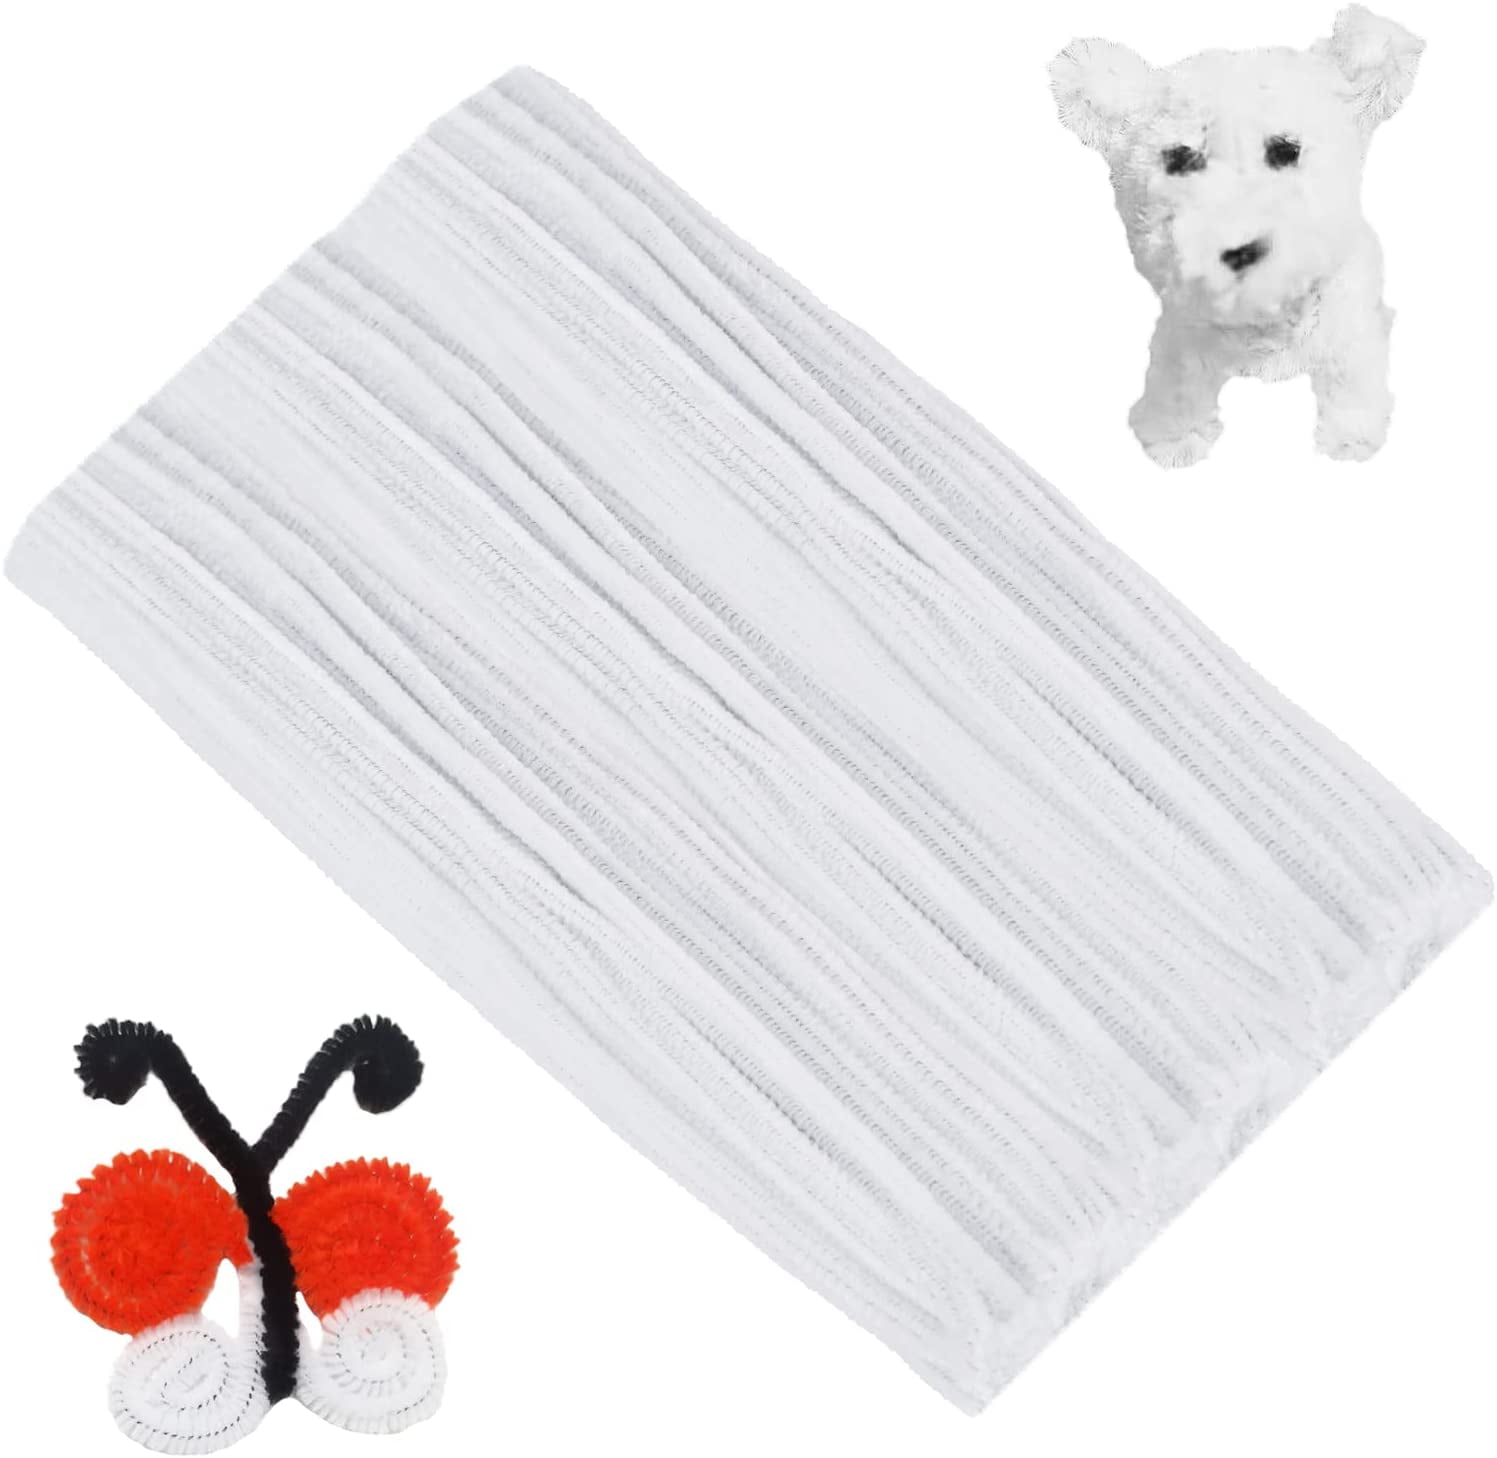 300pcs White Pipe Cleaners For Diy Crafts, Party Decorations, Handicrafts  Decoration